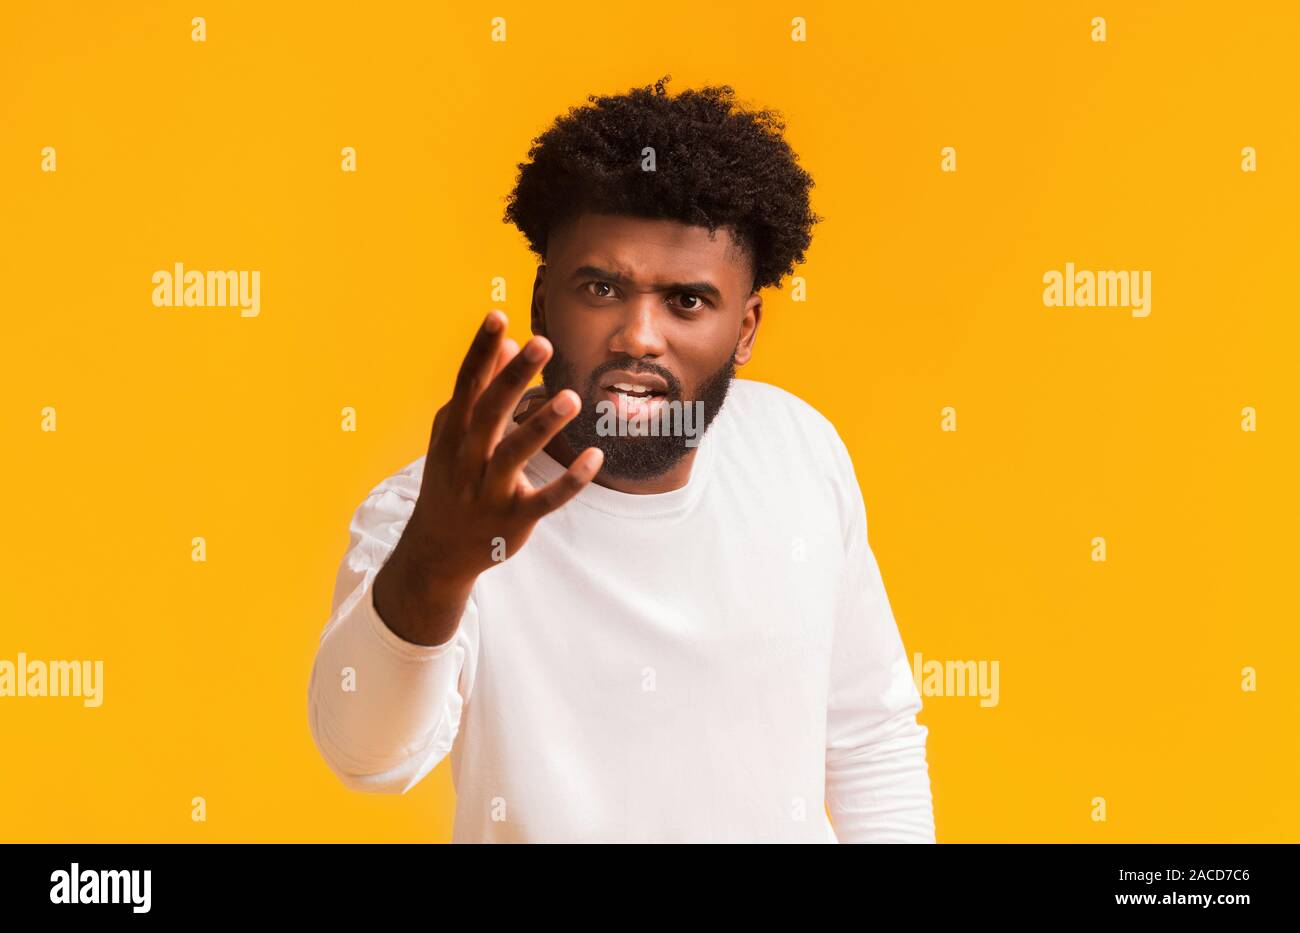 Angry black guy shouting and gesturing over orange background Stock Photo